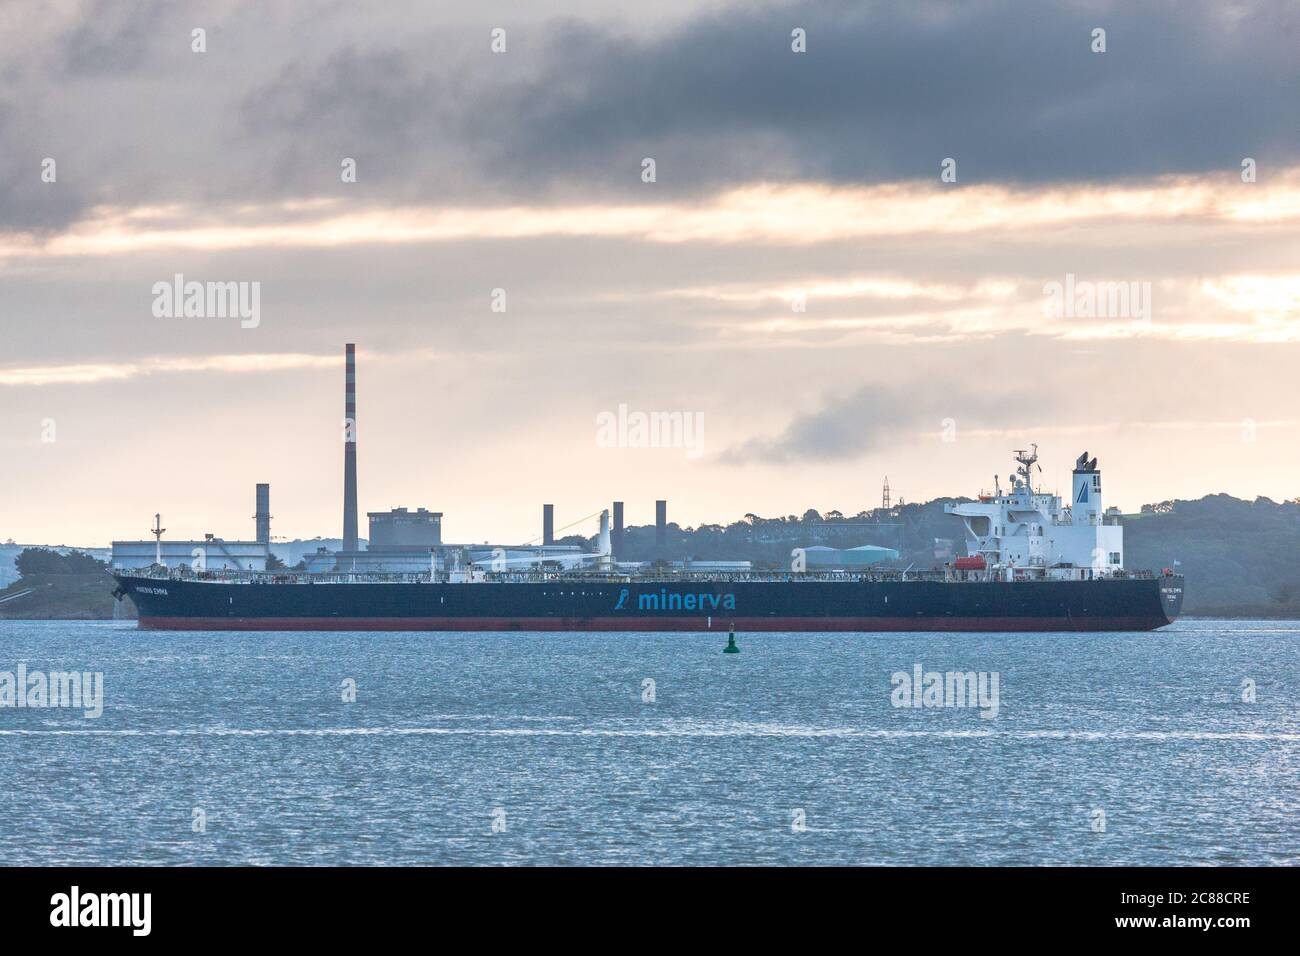 Whitegate, Cork, Ireland. 22nd July, 2020. Oil tanker Minerva Emma steams up Cork Harbour after a twenty day voyage from Port Neches in Texas with a cargo of crude oil for the oil refinery in Whitegate, Co. Cork, Ireland. - Credit; David Creedon / Alamy Live News Stock Photo